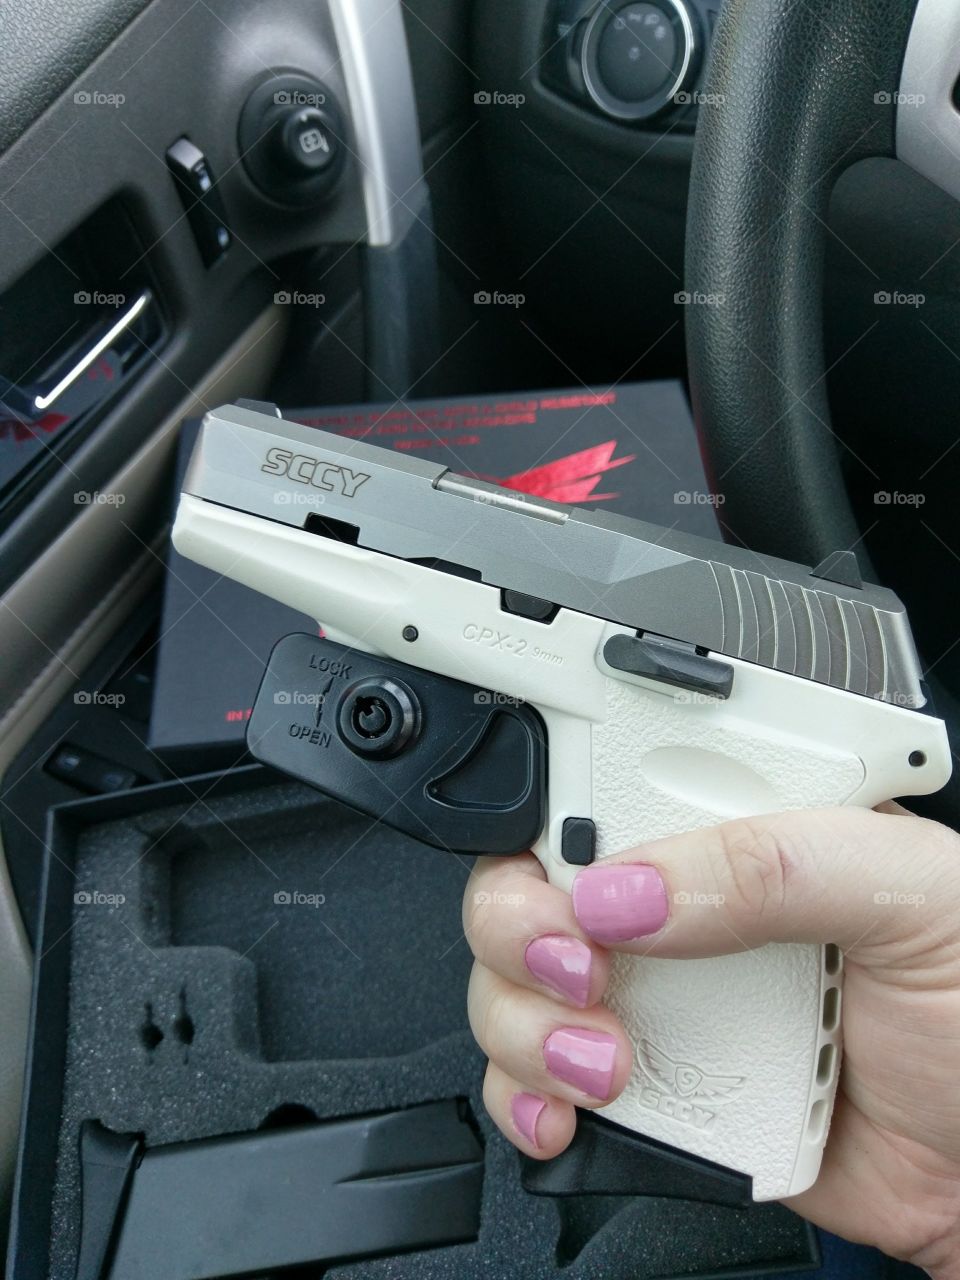 unboxing the white SCCY 9mm